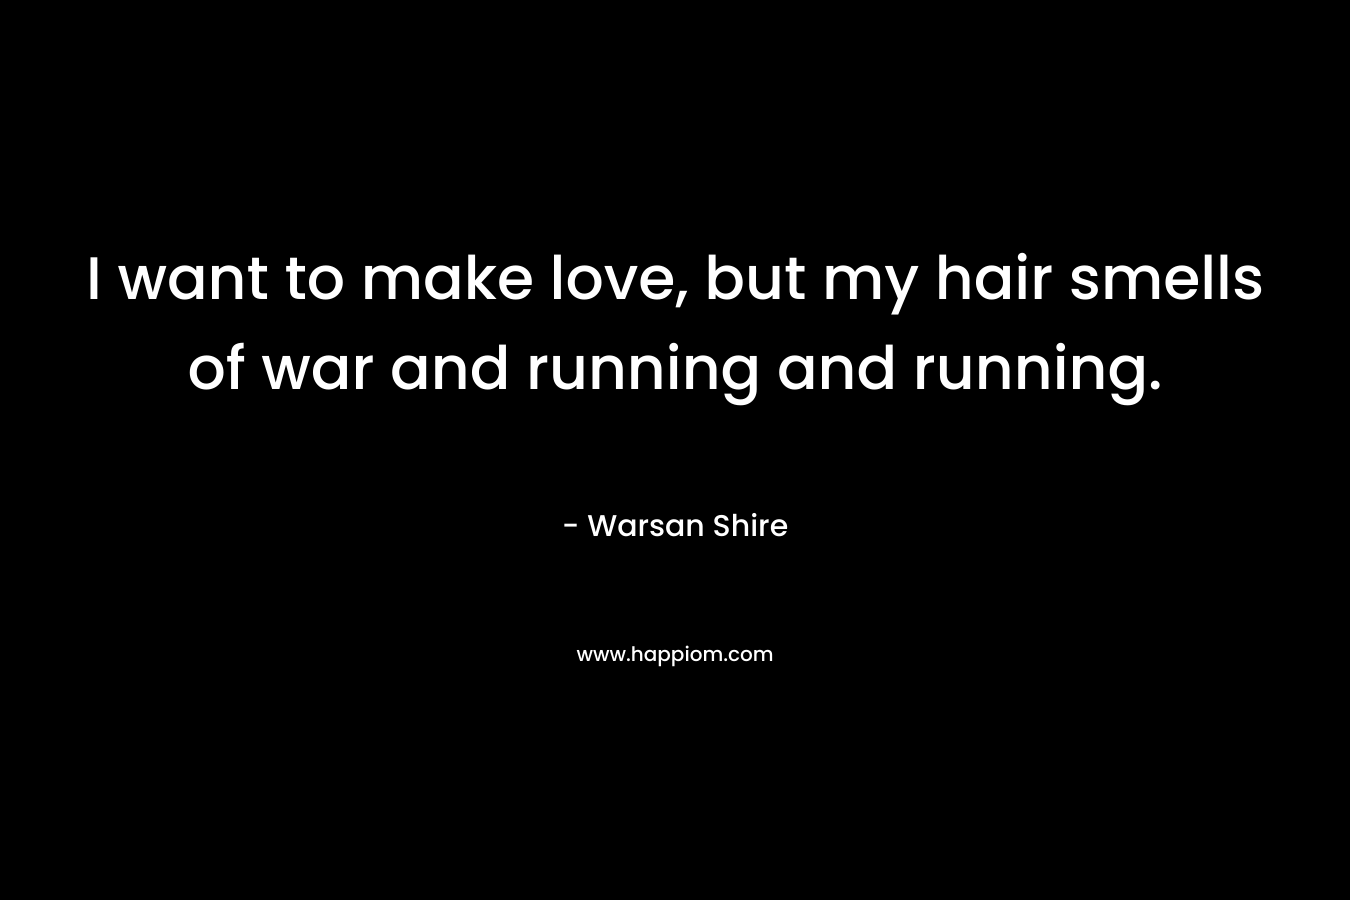 I want to make love, but my hair smells of war and running and running.